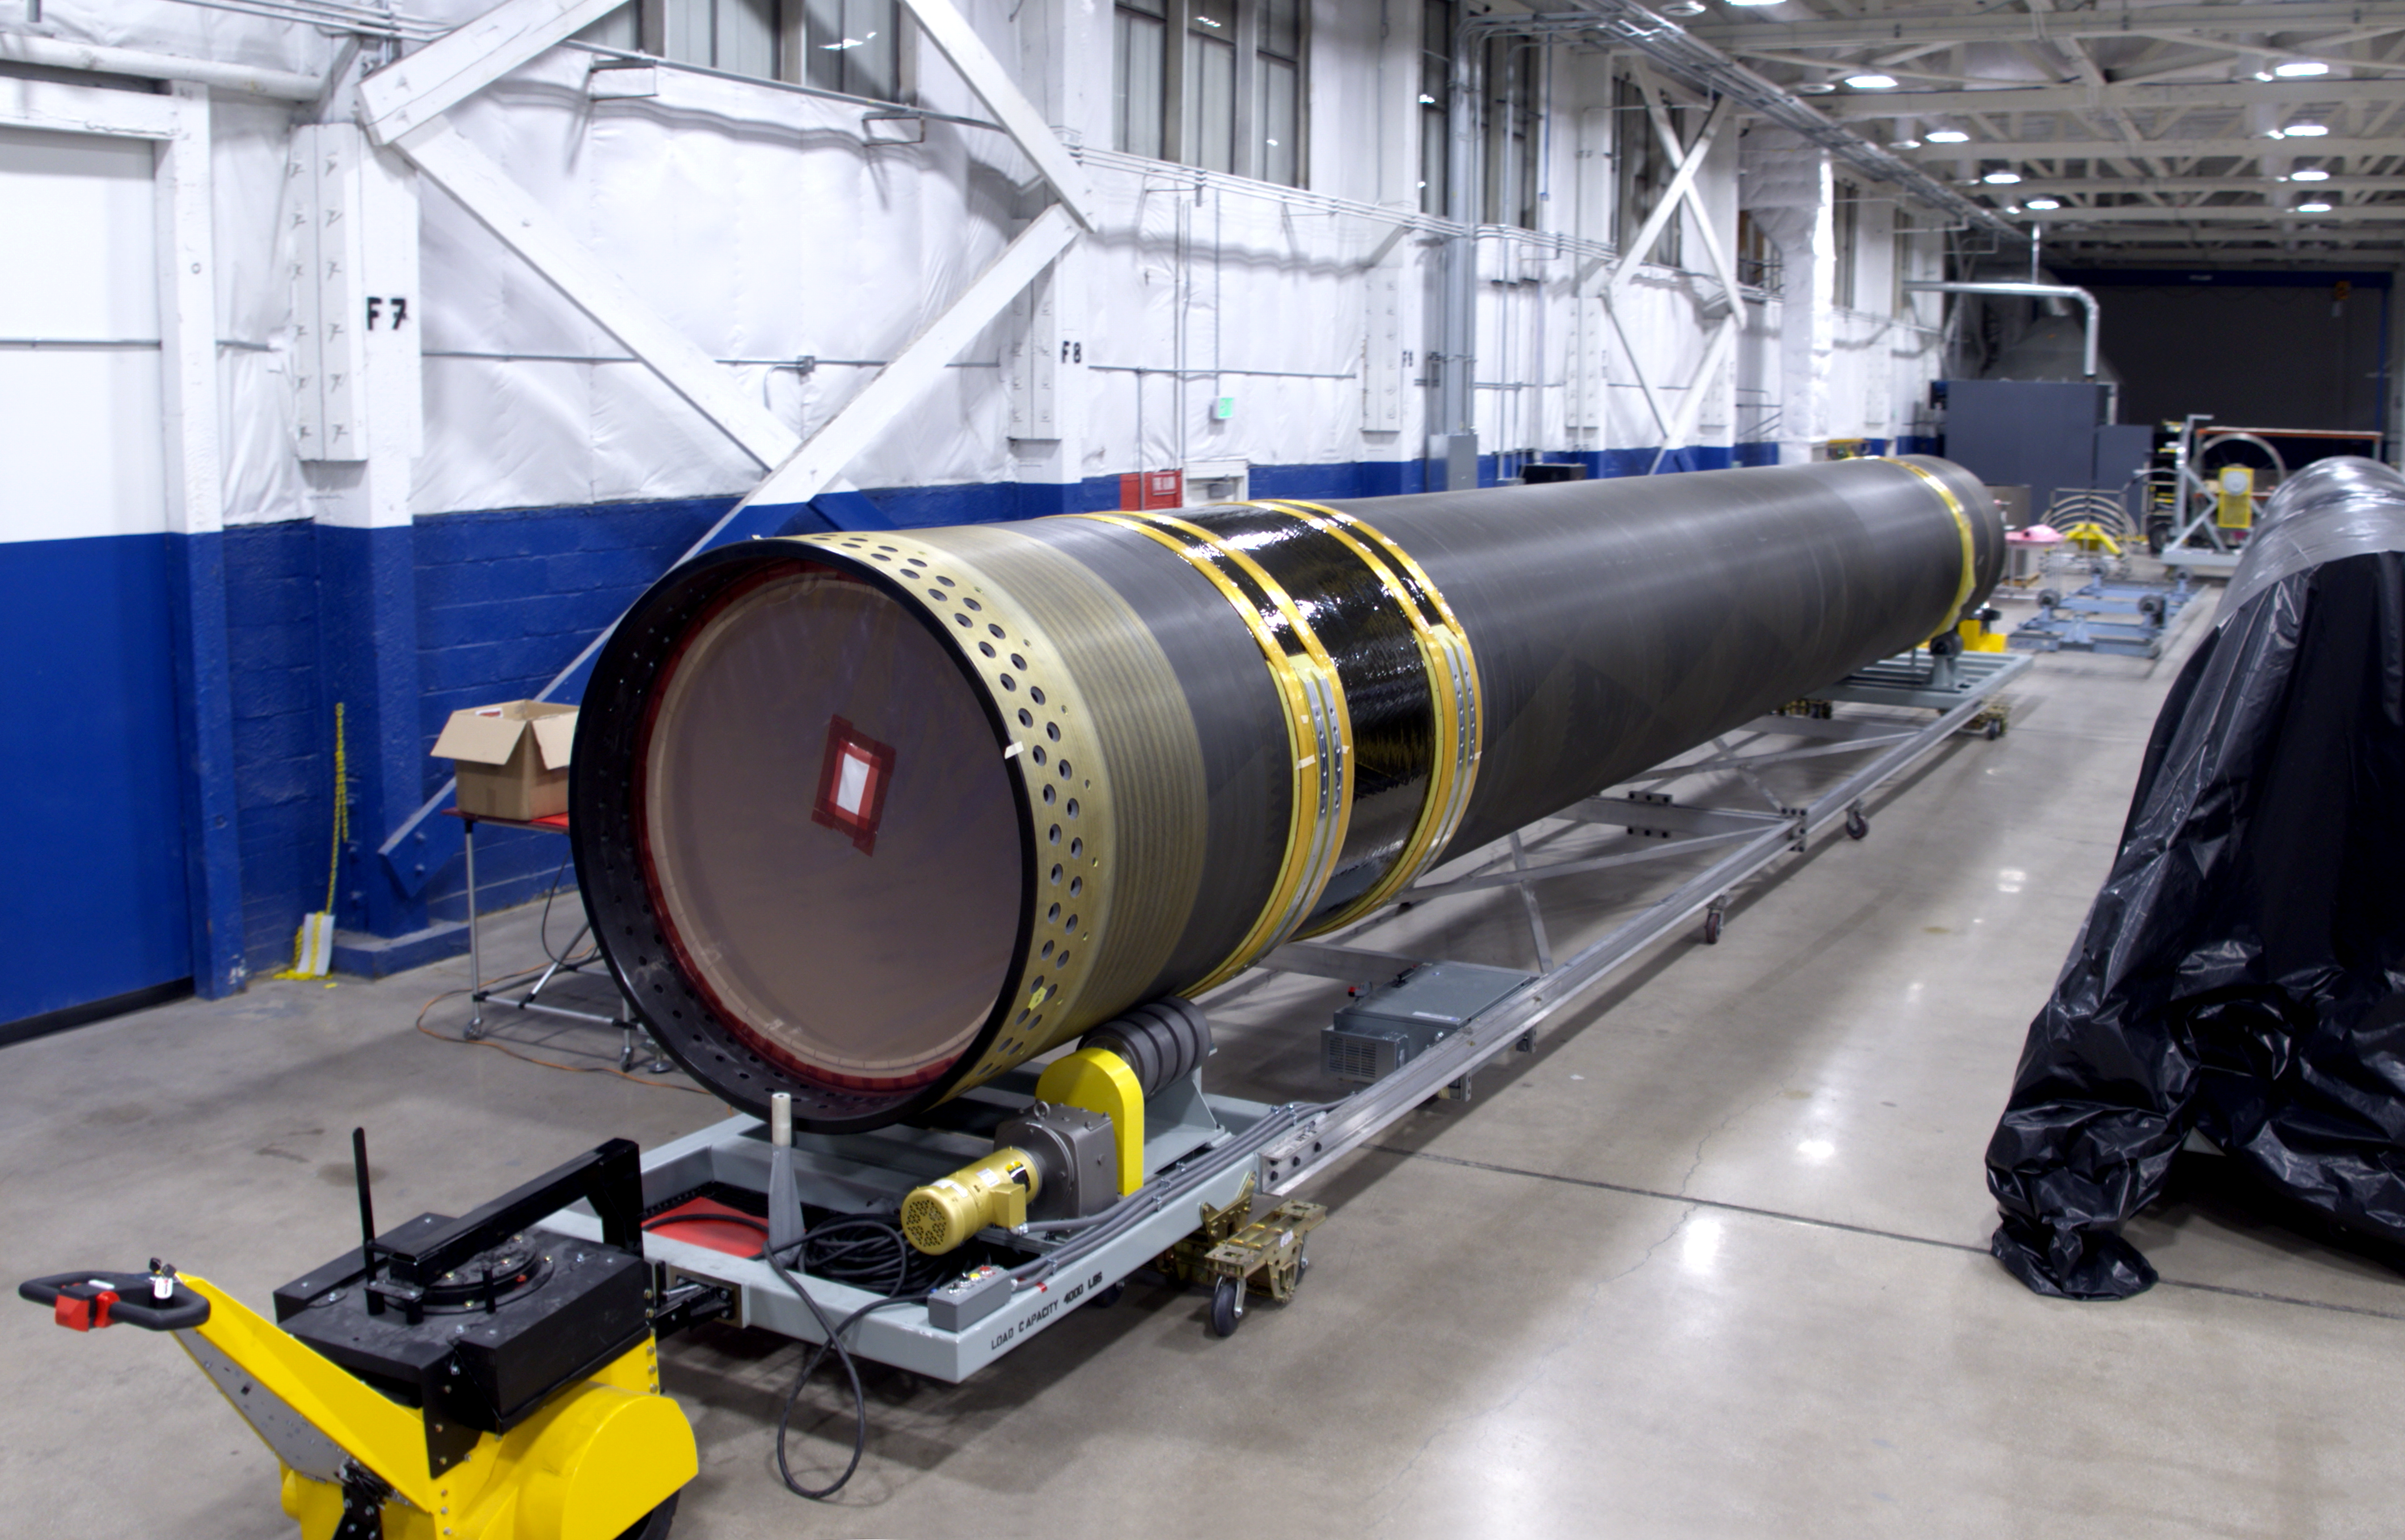 A GEM 63XL rocket motor completes case winding and waits to be filled with propellant.